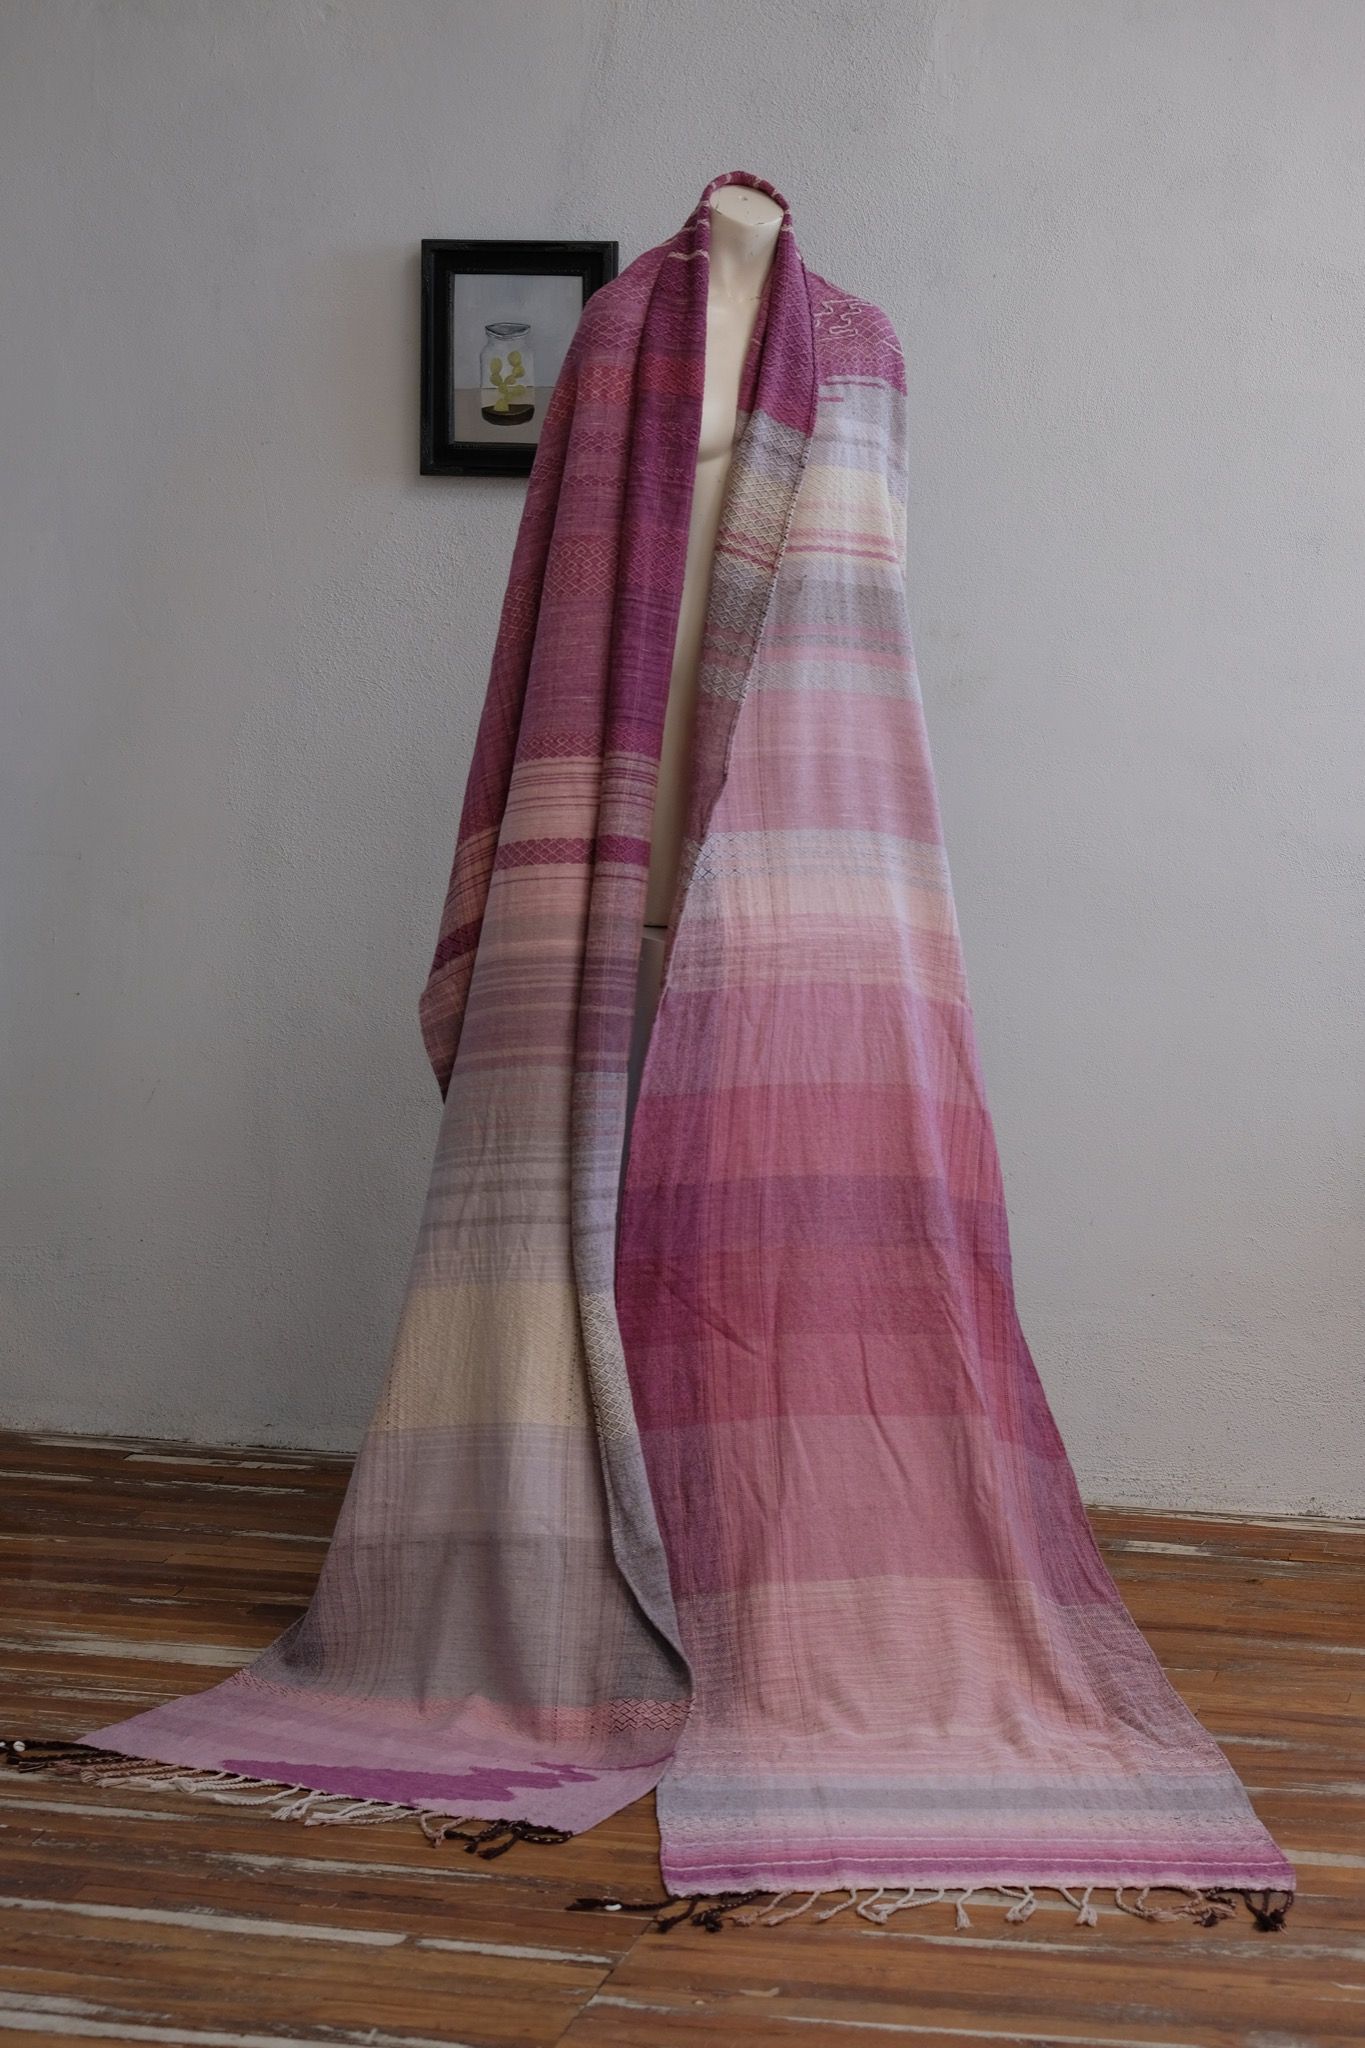 Handwoven fabric lays on a white mannequin in a gallery space. The fabric is naturally dyed with cochineal in all shades of pink and fuchsia with a design of a river and three moons on it